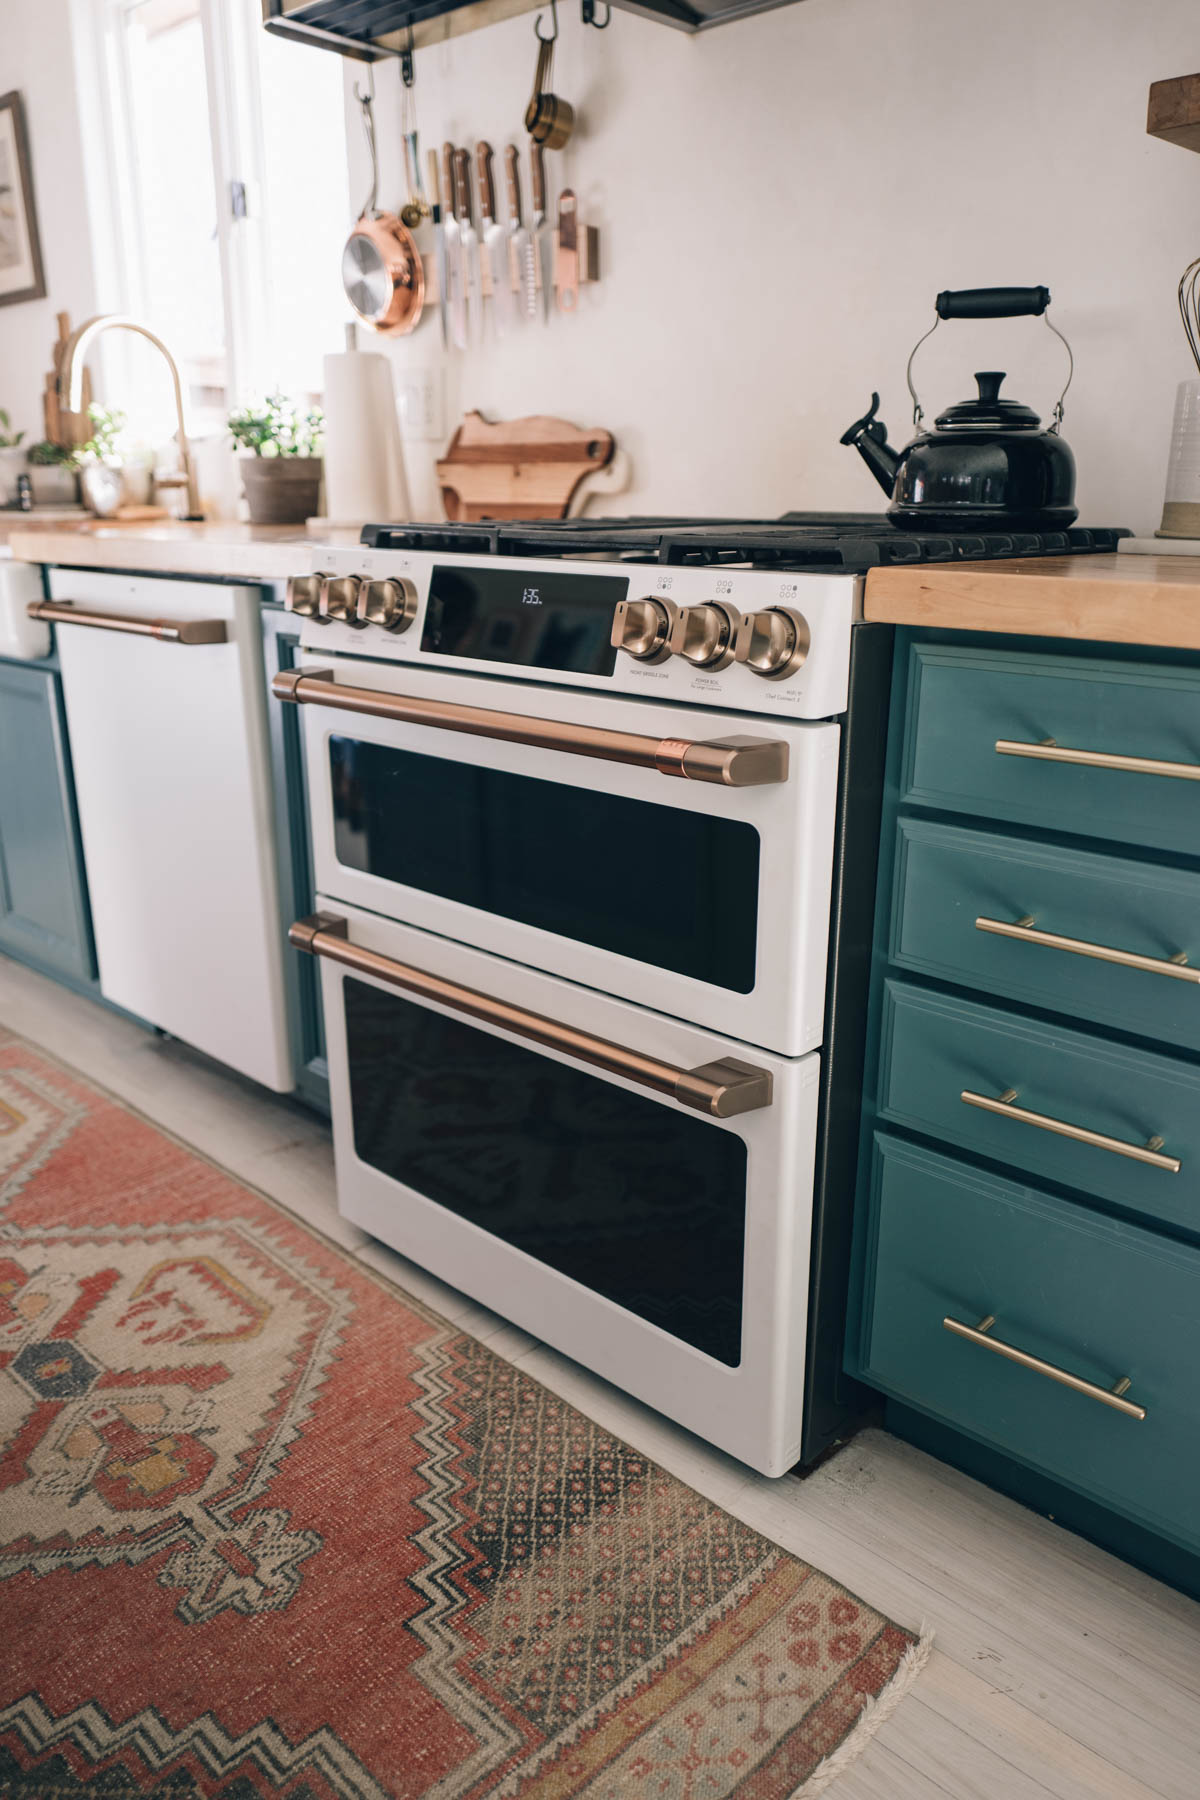 No more boring appliances, customize your kitchen with @cafeappliances Pictured is the Dual-Fuel Double Oven with Convection Range in Matte White with Brushed Bronze Hardware in Jess Kirby's kitchen